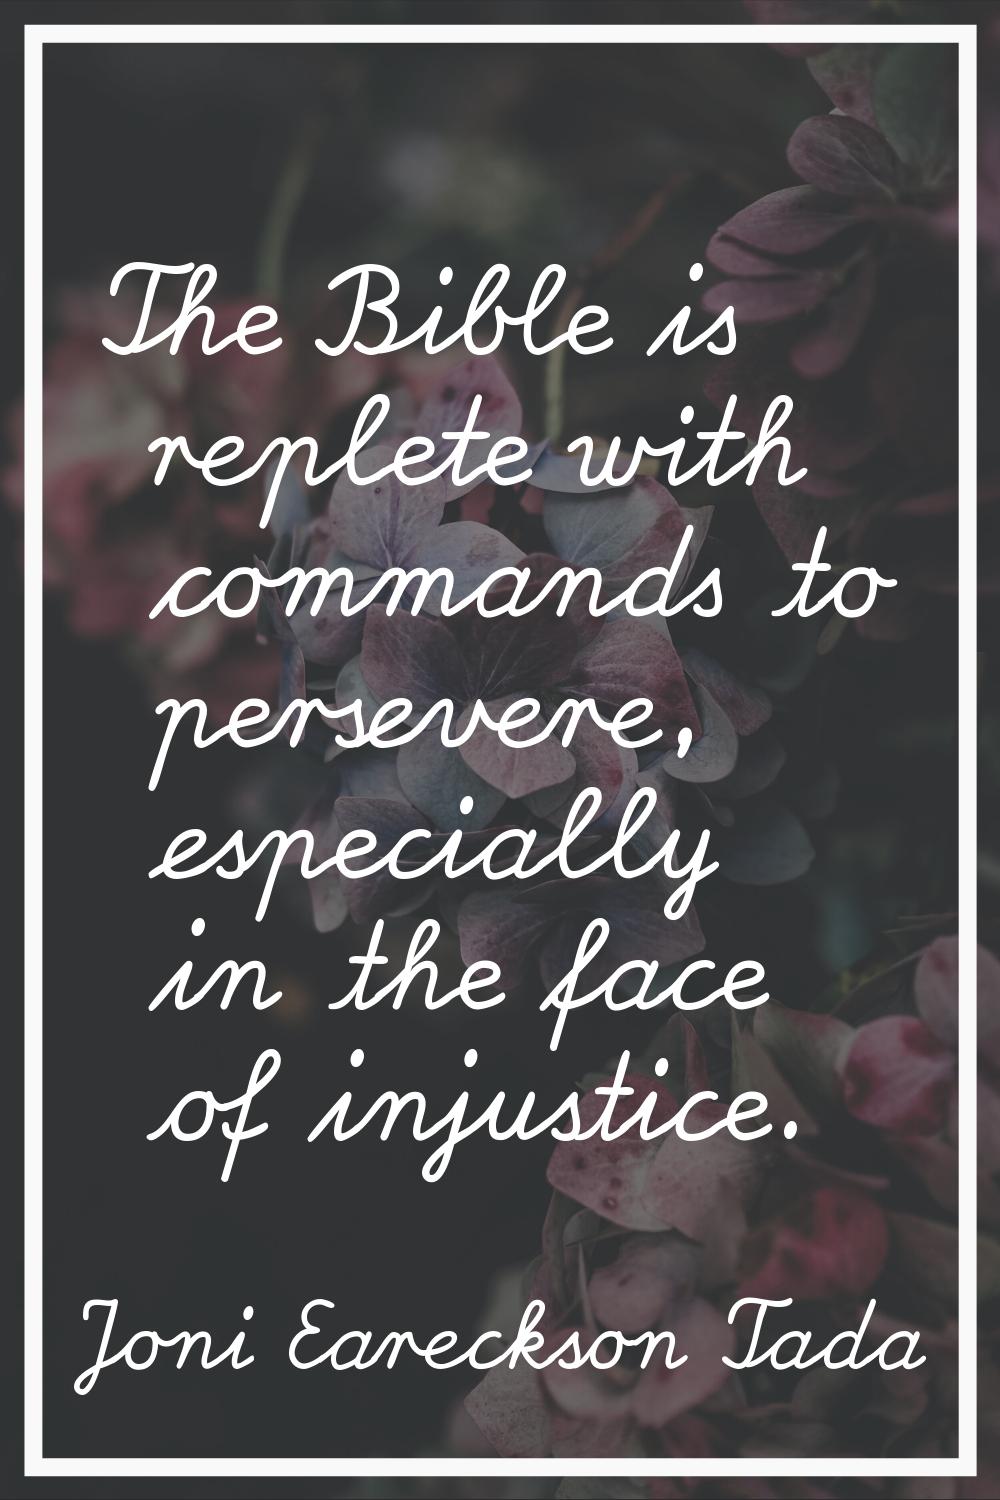 The Bible is replete with commands to persevere, especially in the face of injustice.